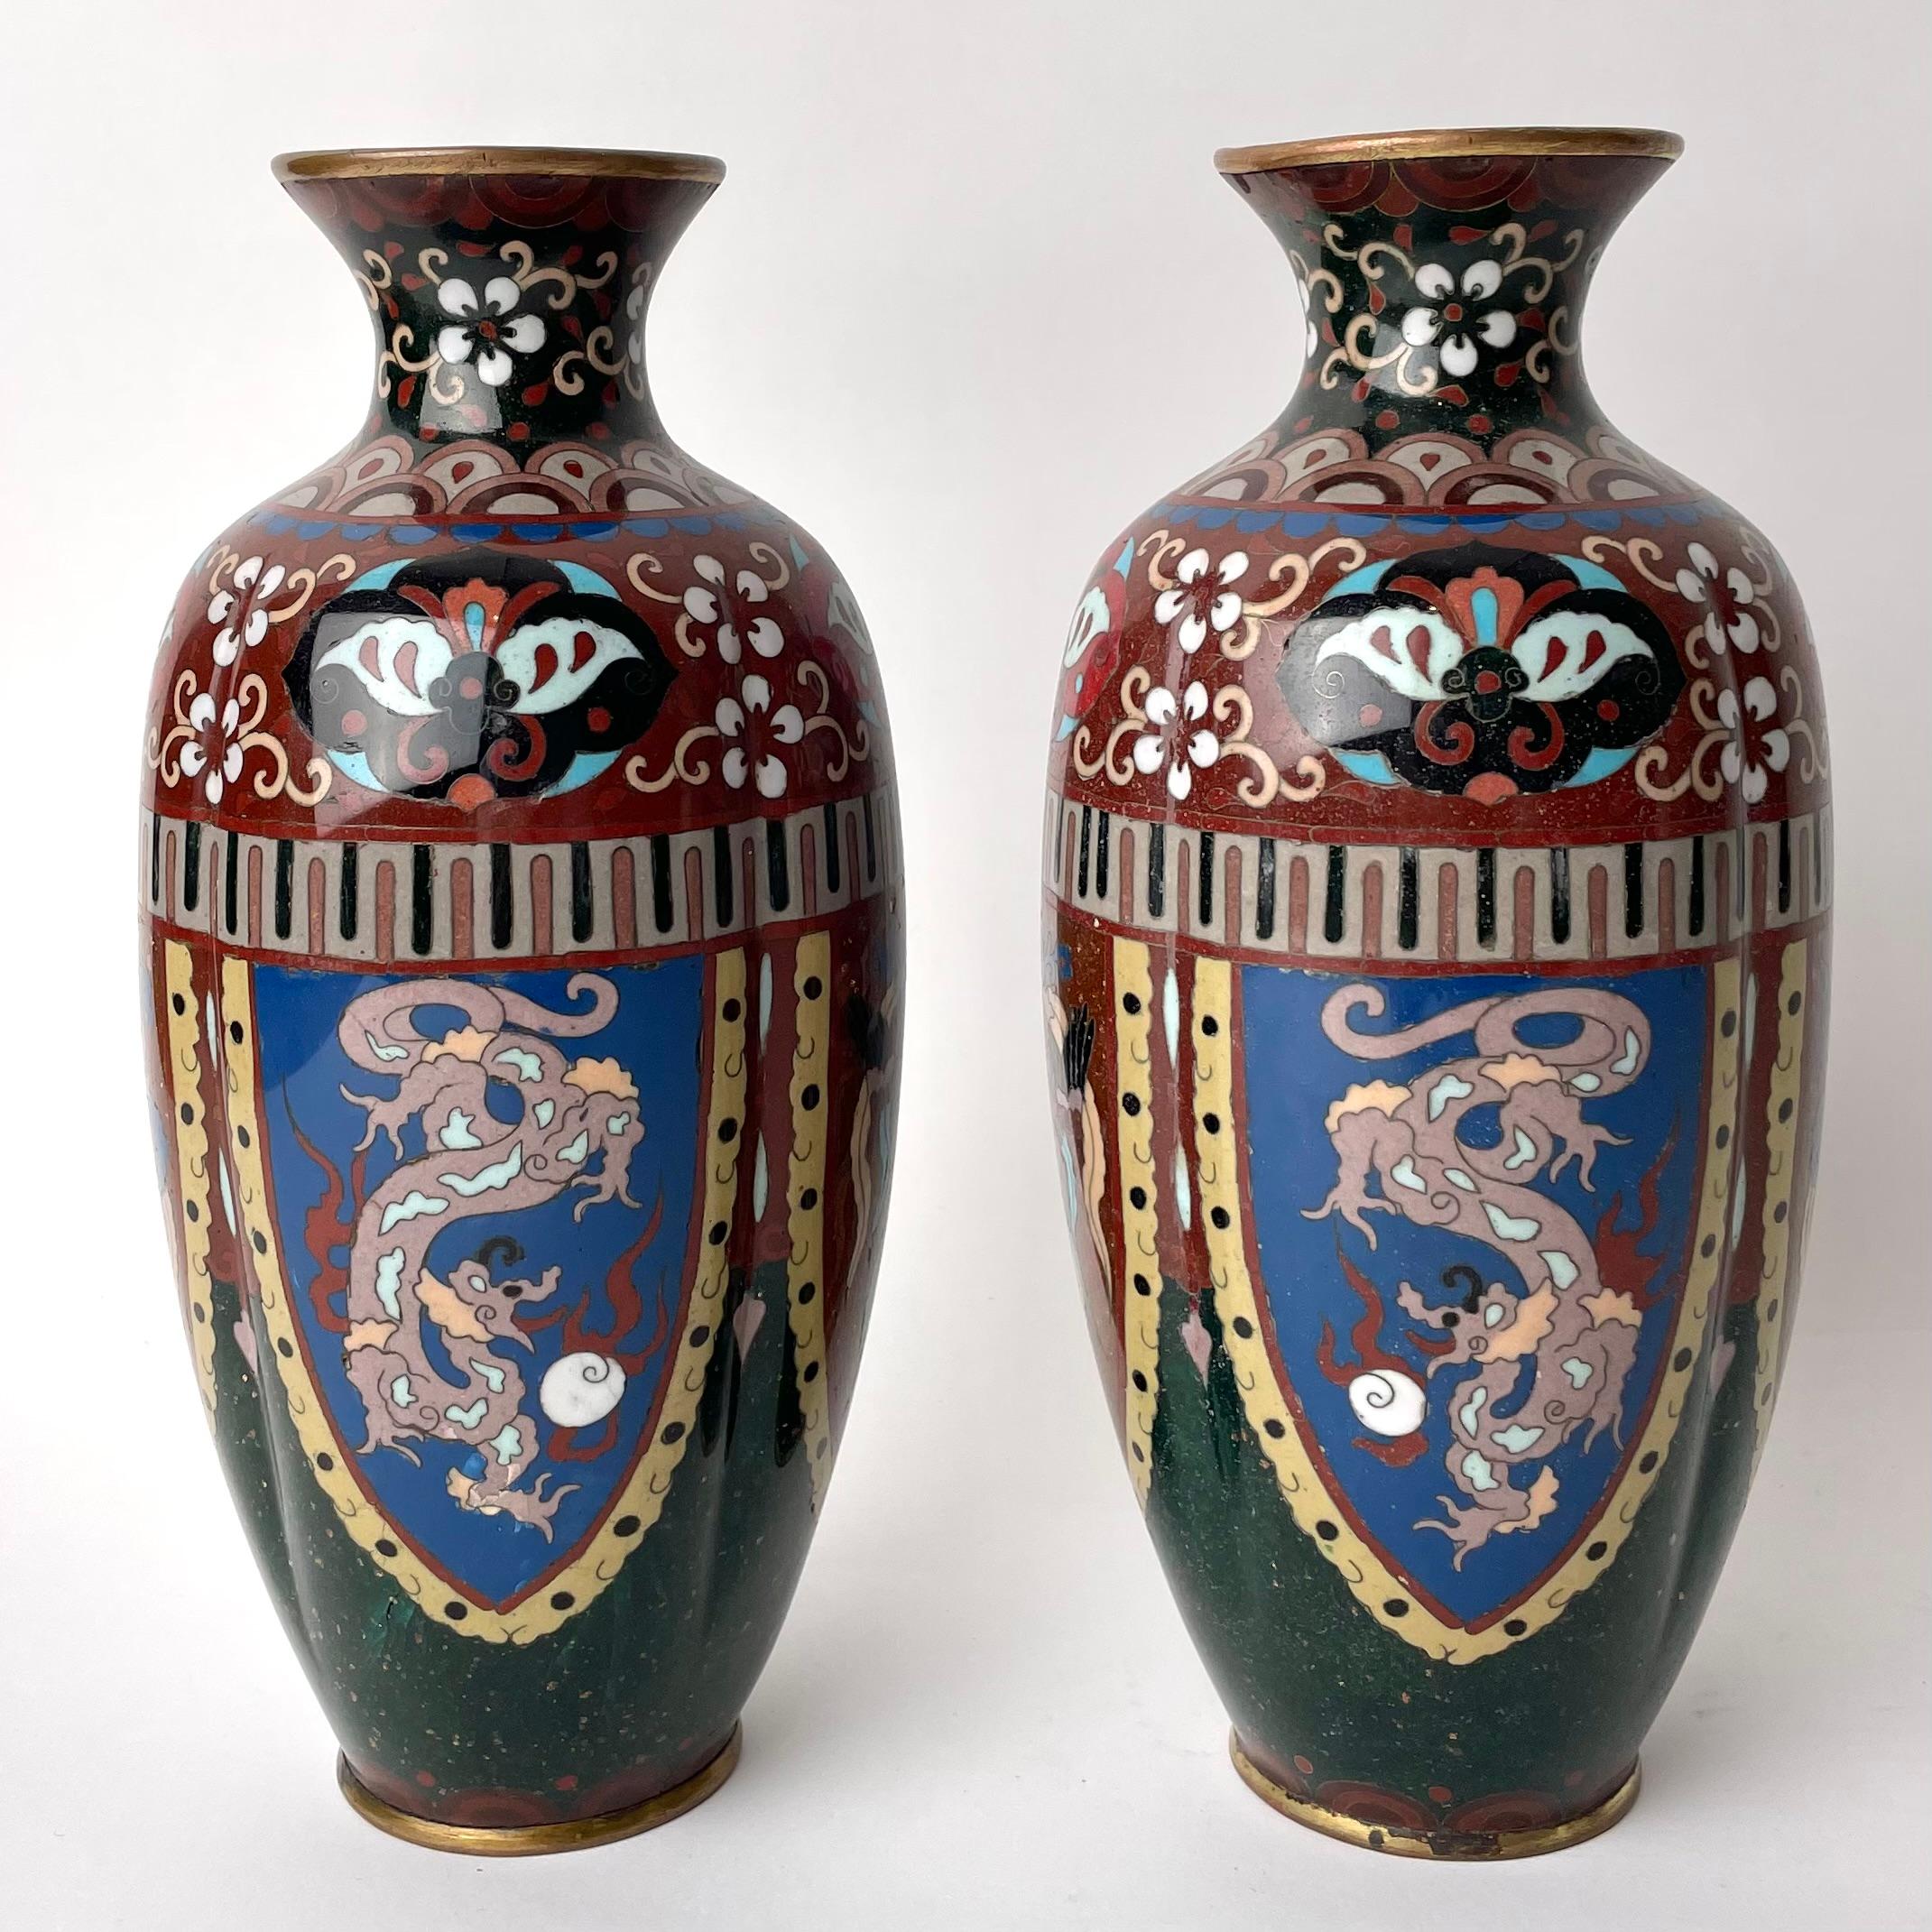 A pair of Japanese cloisonné enamel vases. Meiji era Japan (1867-1912), a period marked by rapid transformation of Japanese traditional society into a global power. The period of growth was preceded by an era of isolation, with Japan to a large